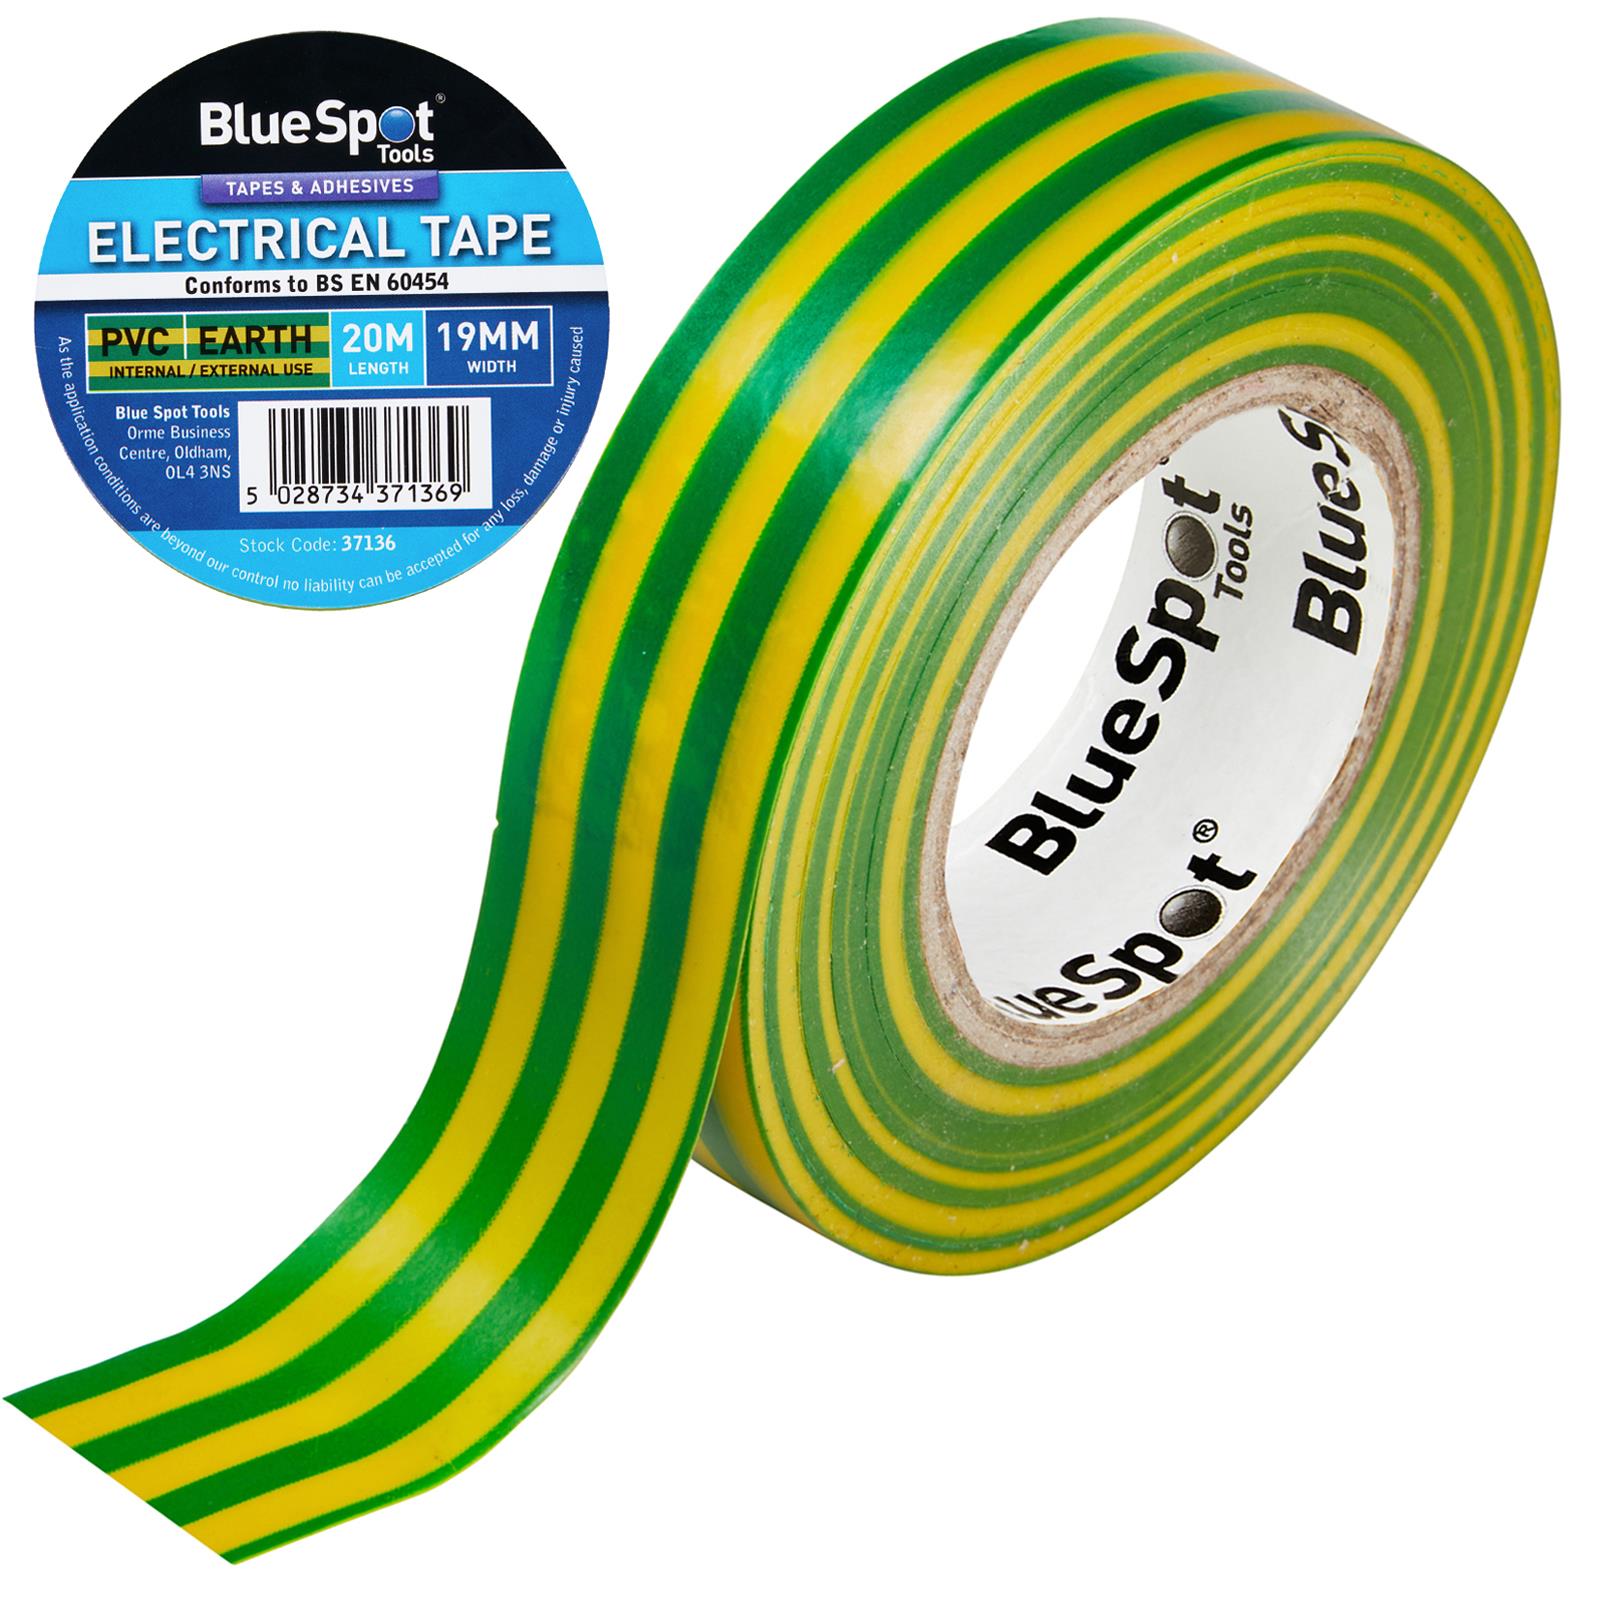 BlueSpot Electrical Insulation Tape Earth (Yellow and Green) PVC 19mm x 20m